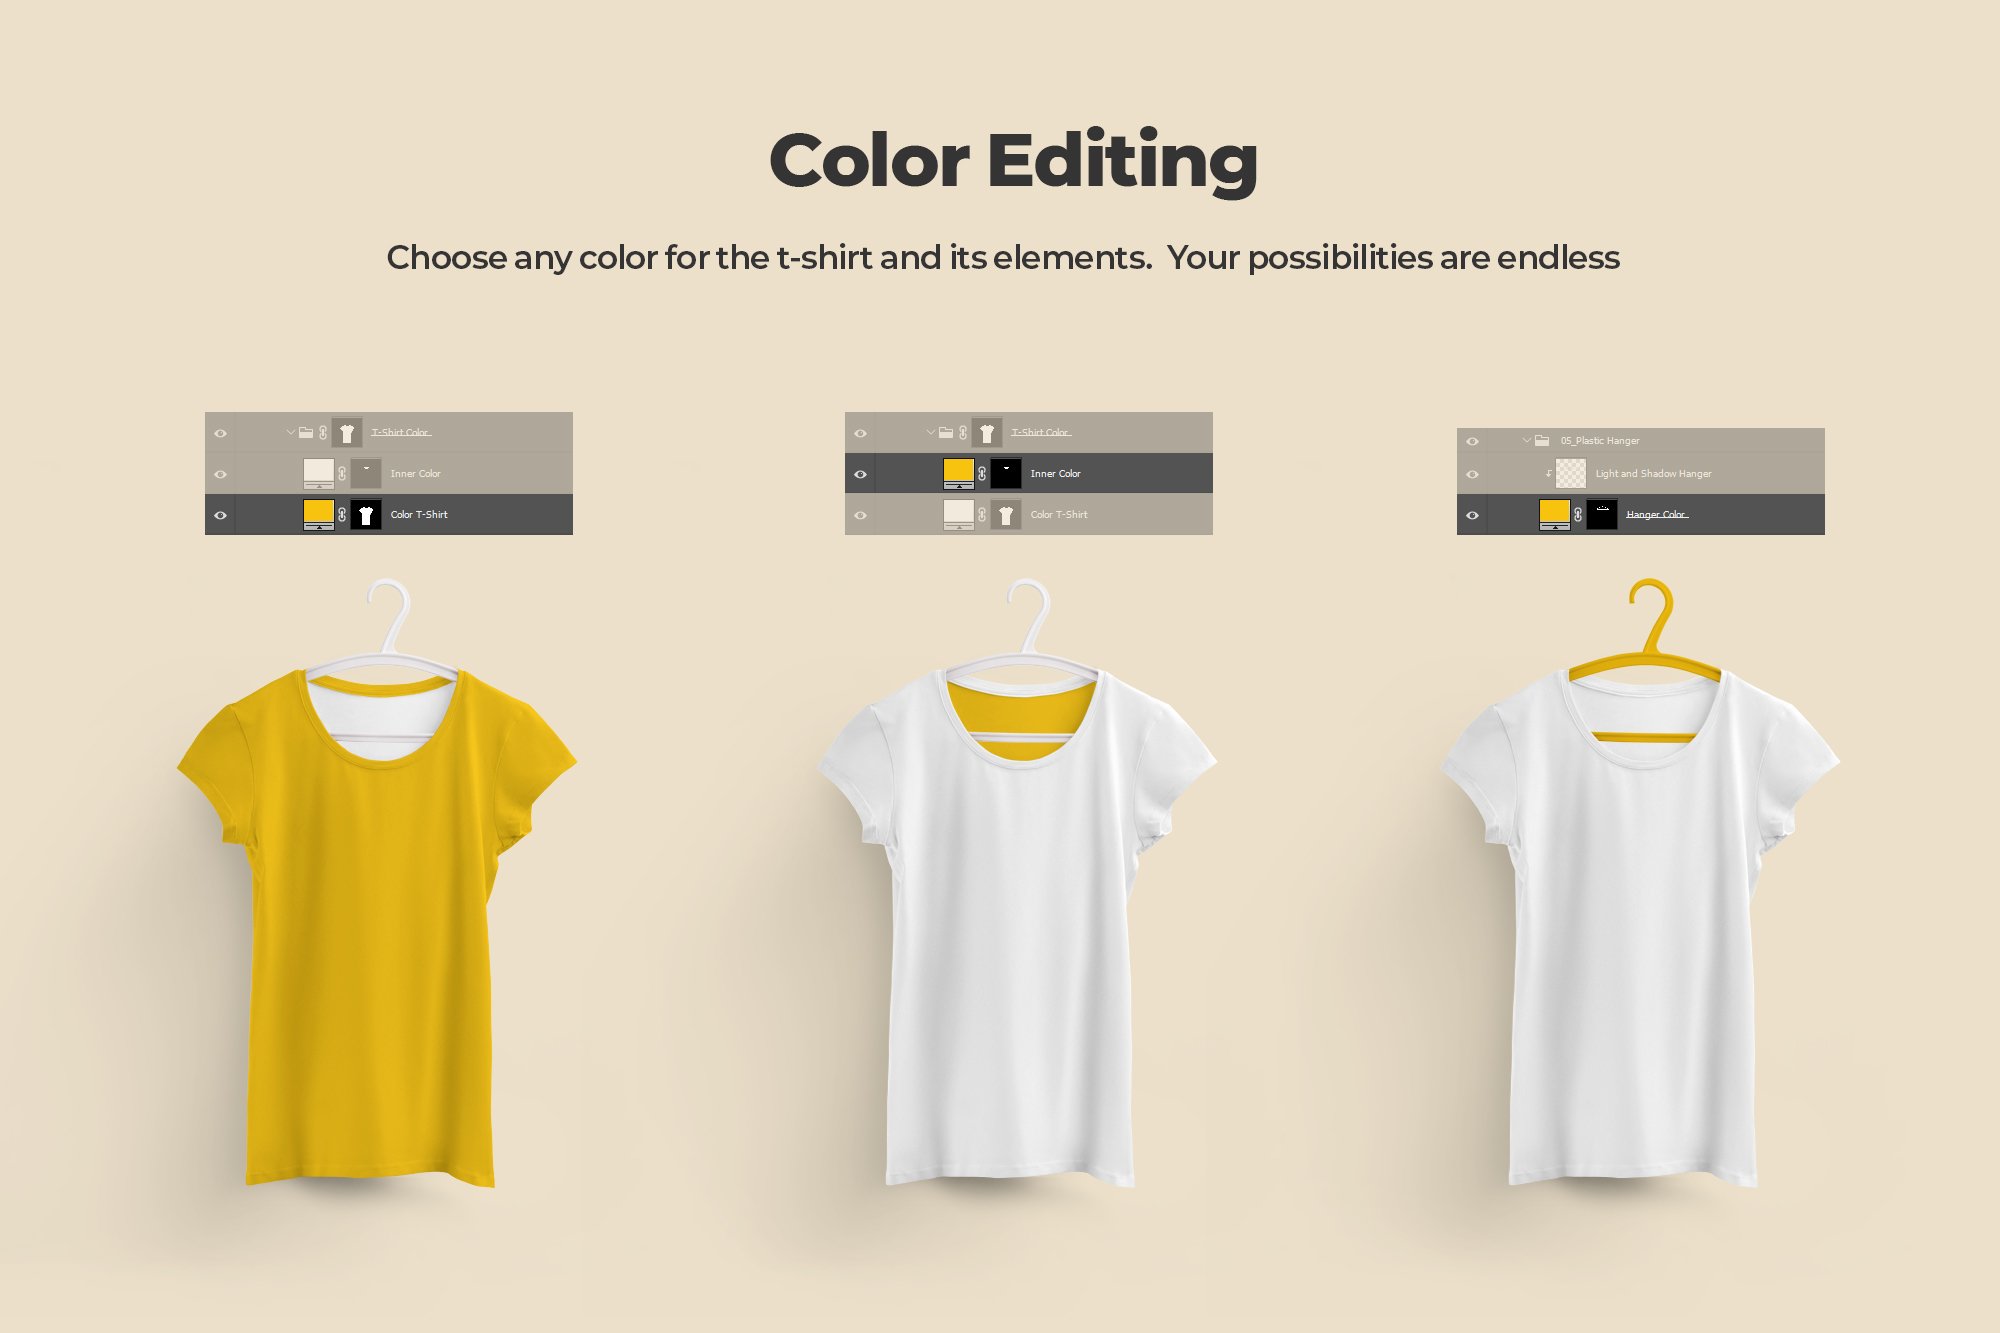 You can edit t-shirt color in your way.